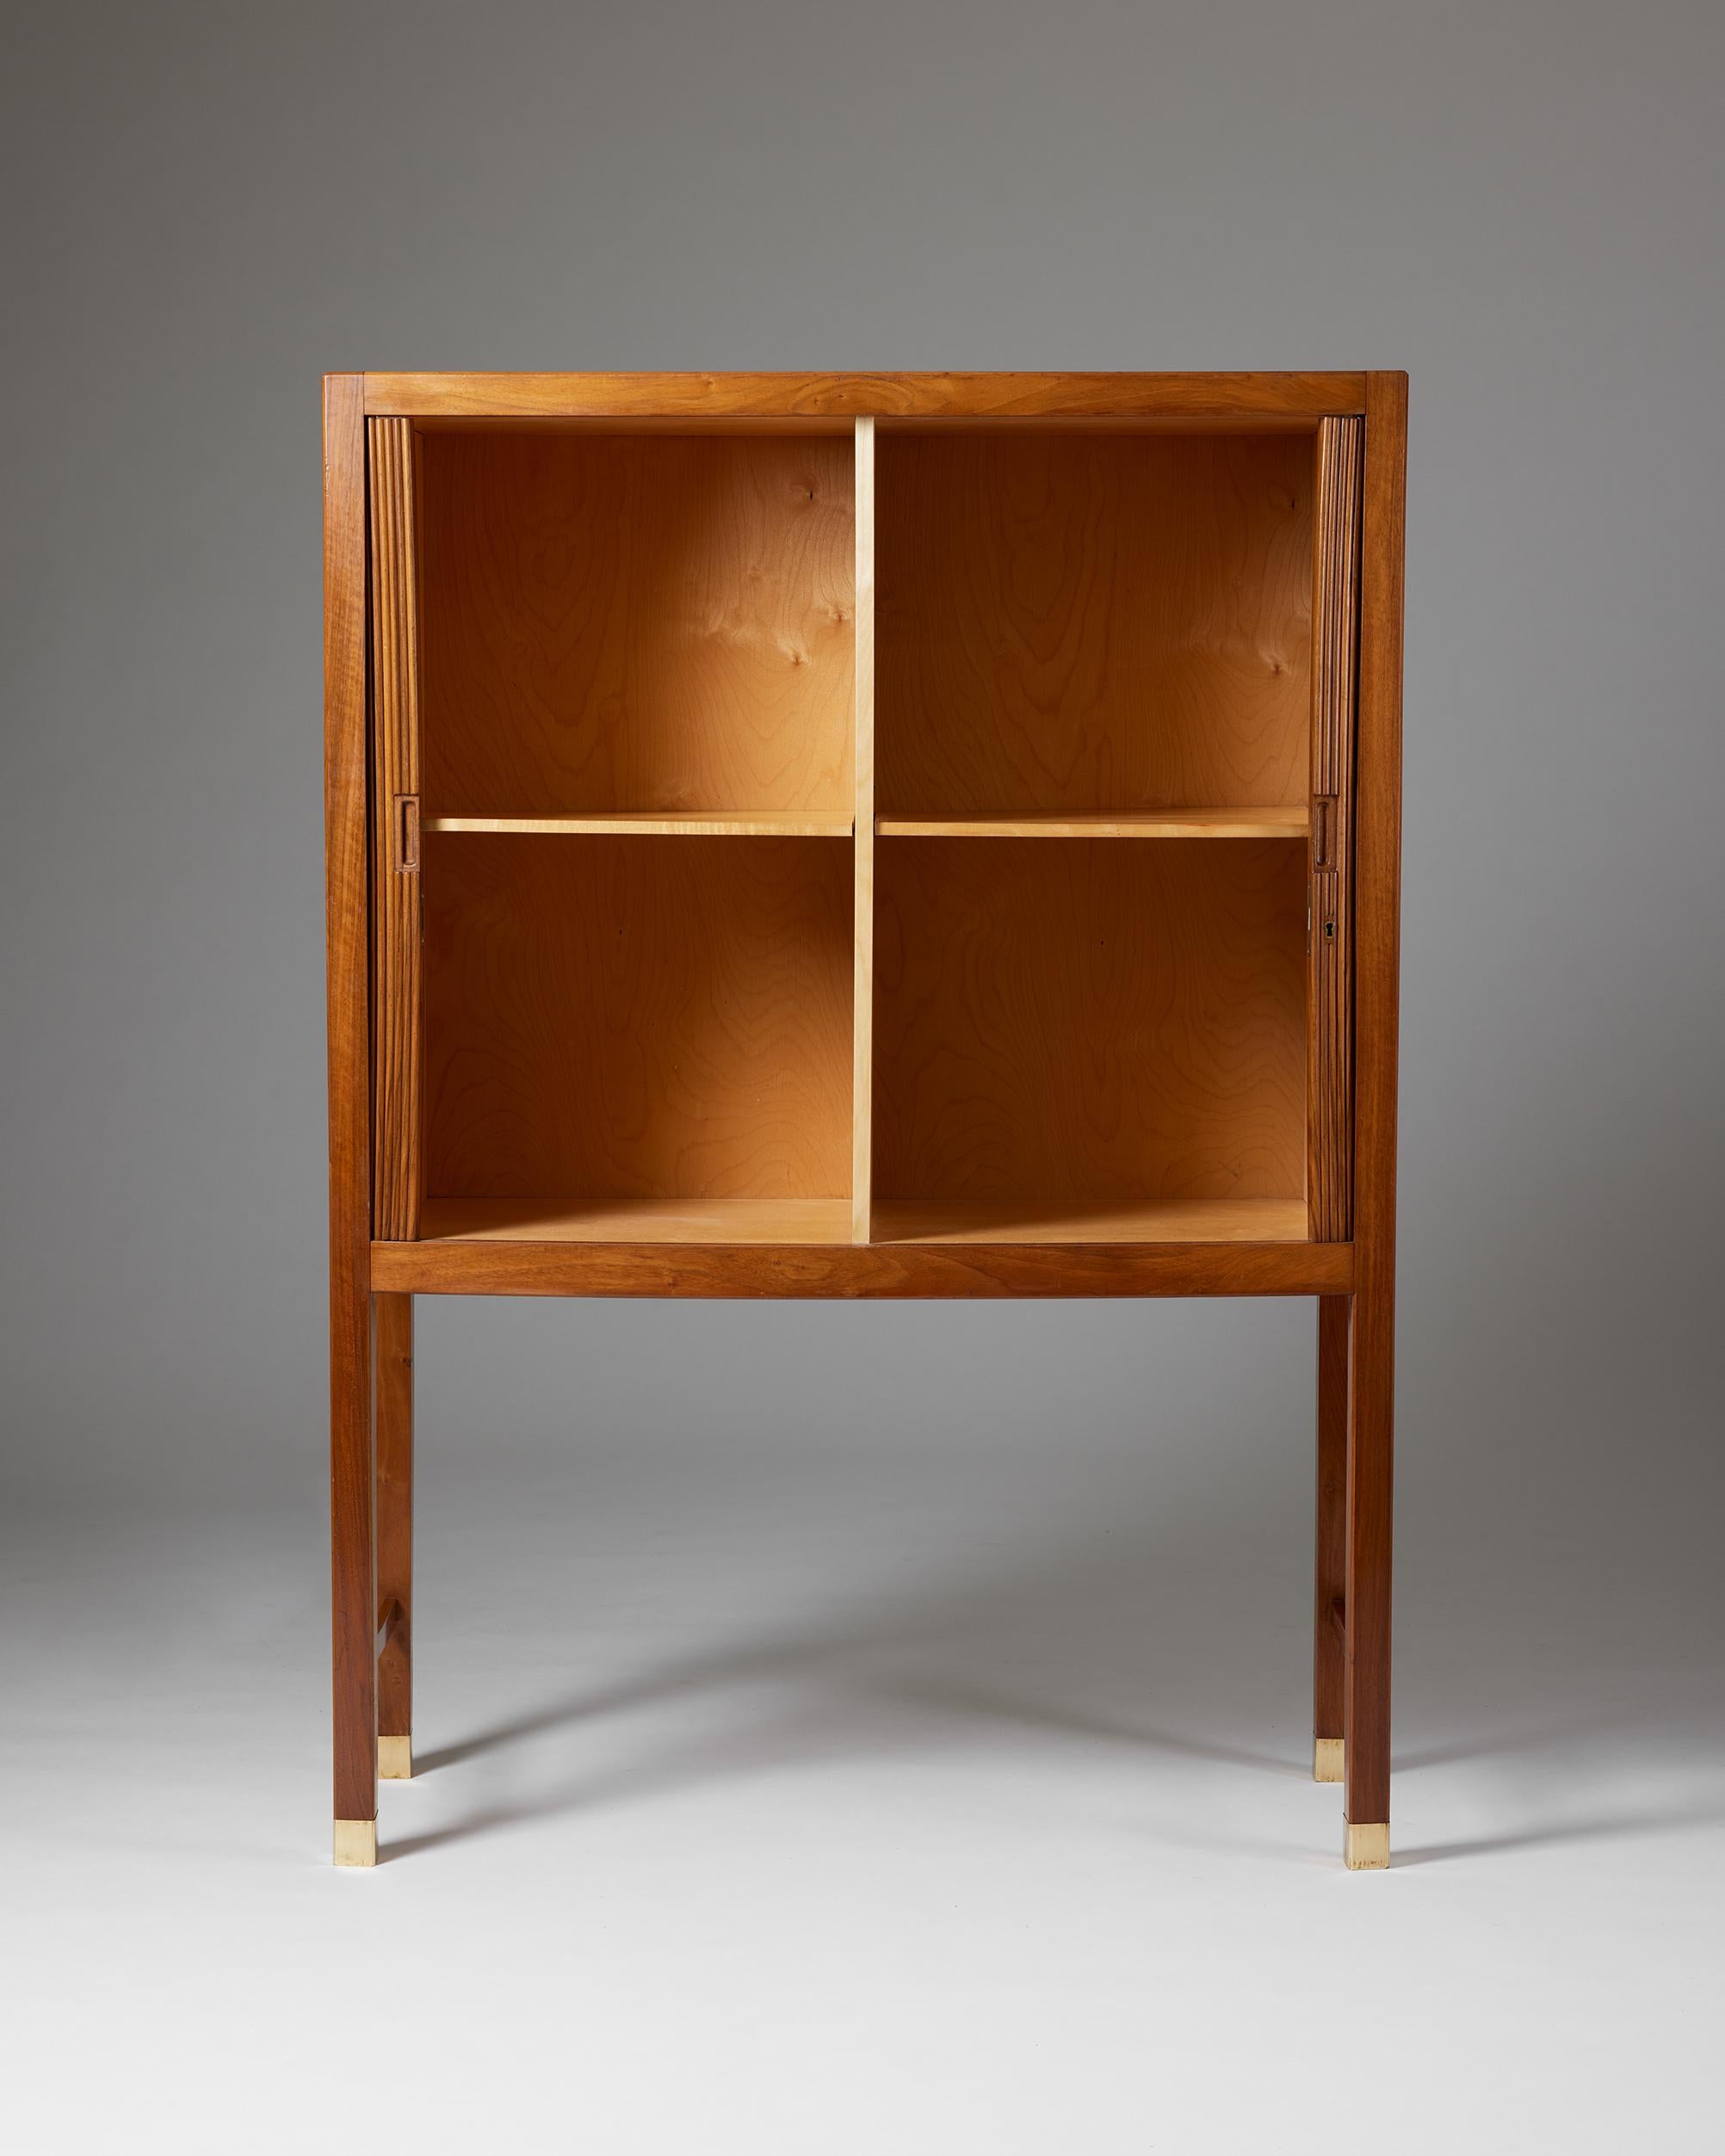 Cabinet with Tambour Doors Designed by a Danish Cabinetmaker, Denmark, 1950s For Sale 3